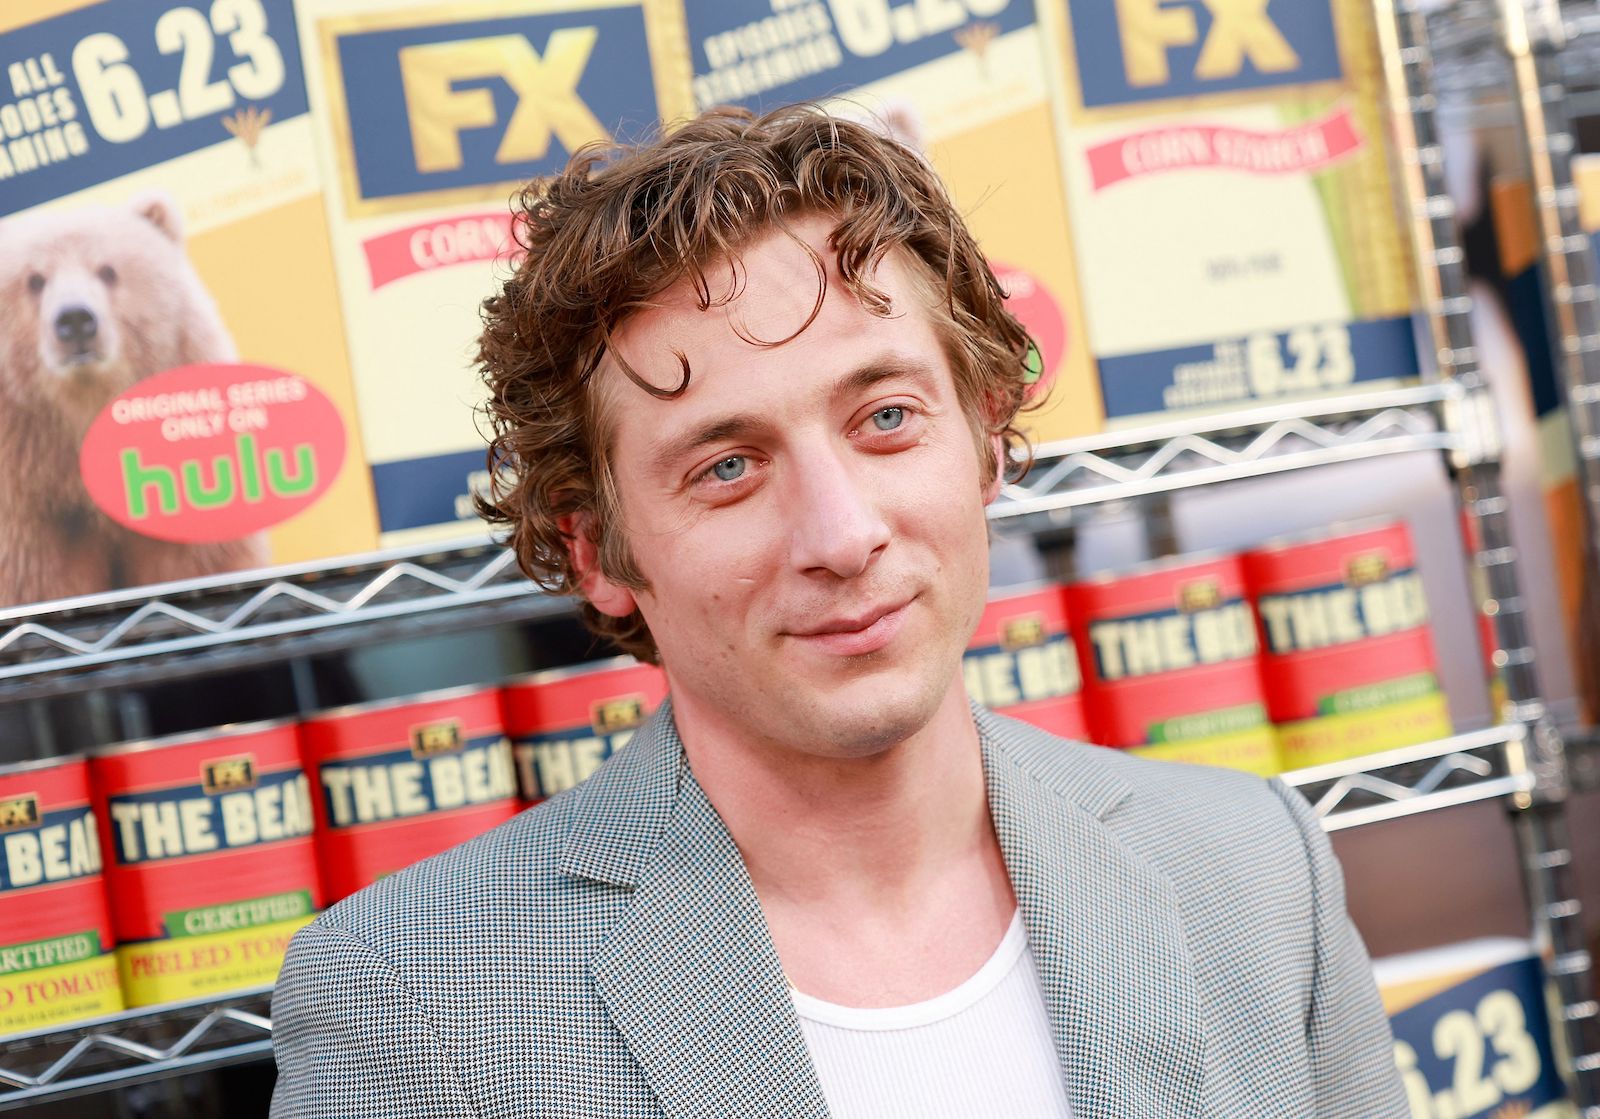 ‘Shameless’ Star Jeremy Allen White Endured Burns, Cuts on ‘The Bear’  – Had a ‘Nonexistent’ Interest in Cooking